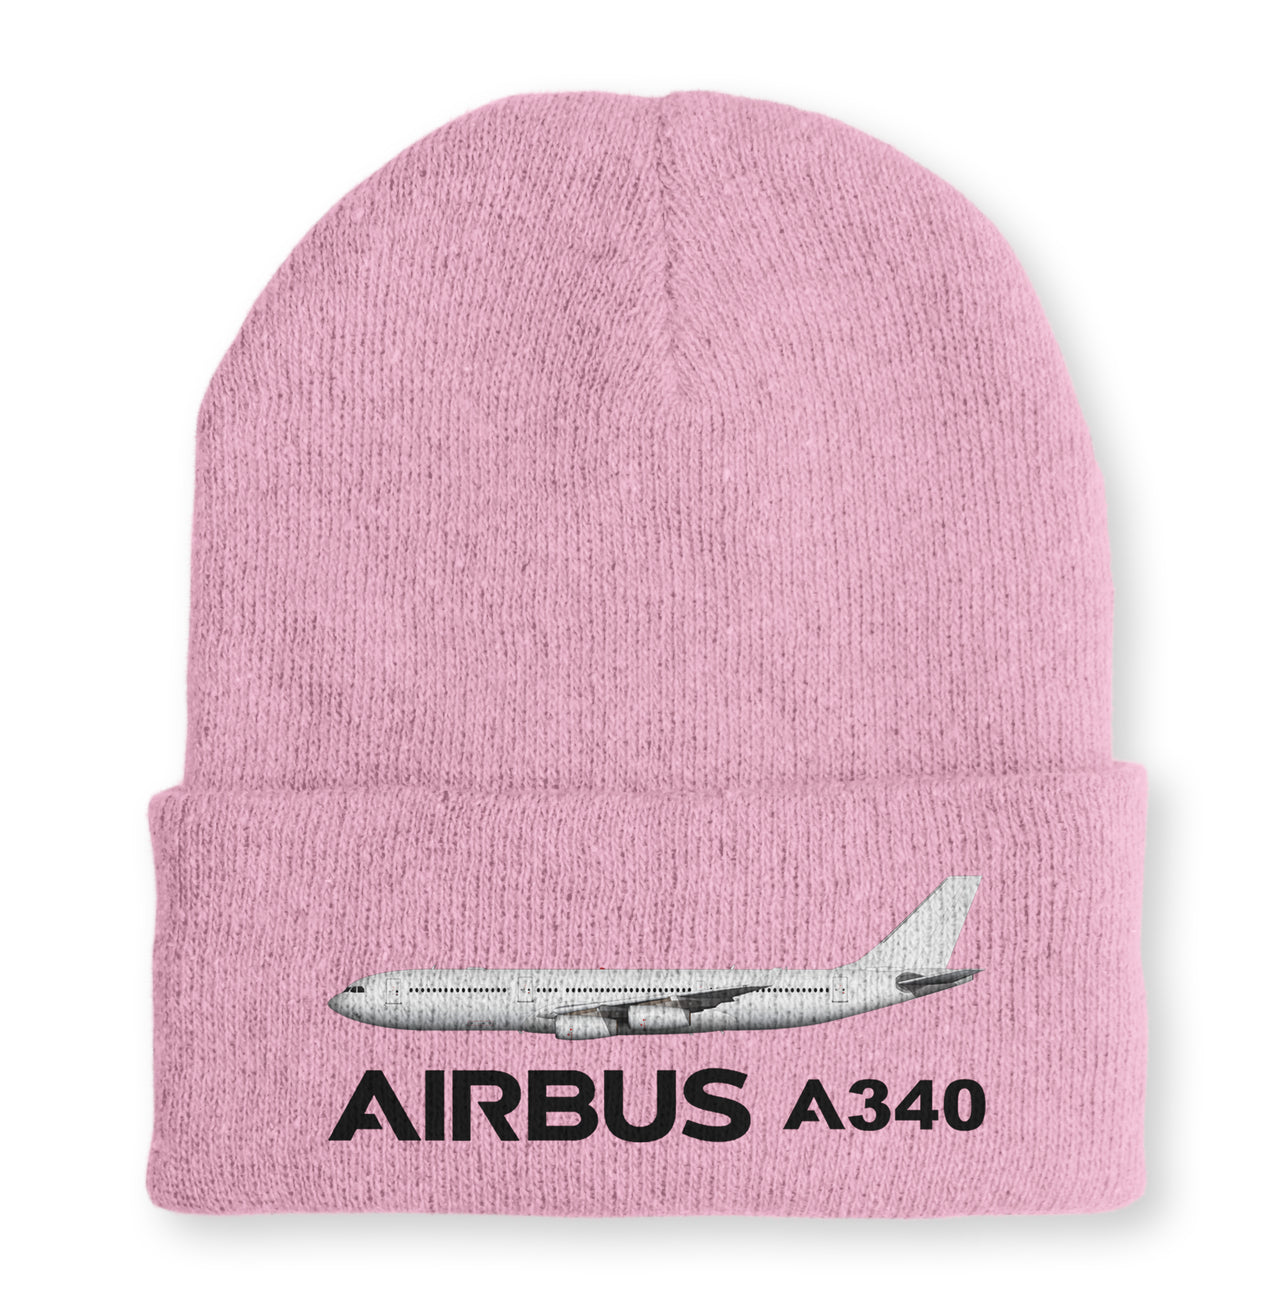 The Airbus A340 Embroidered Beanies